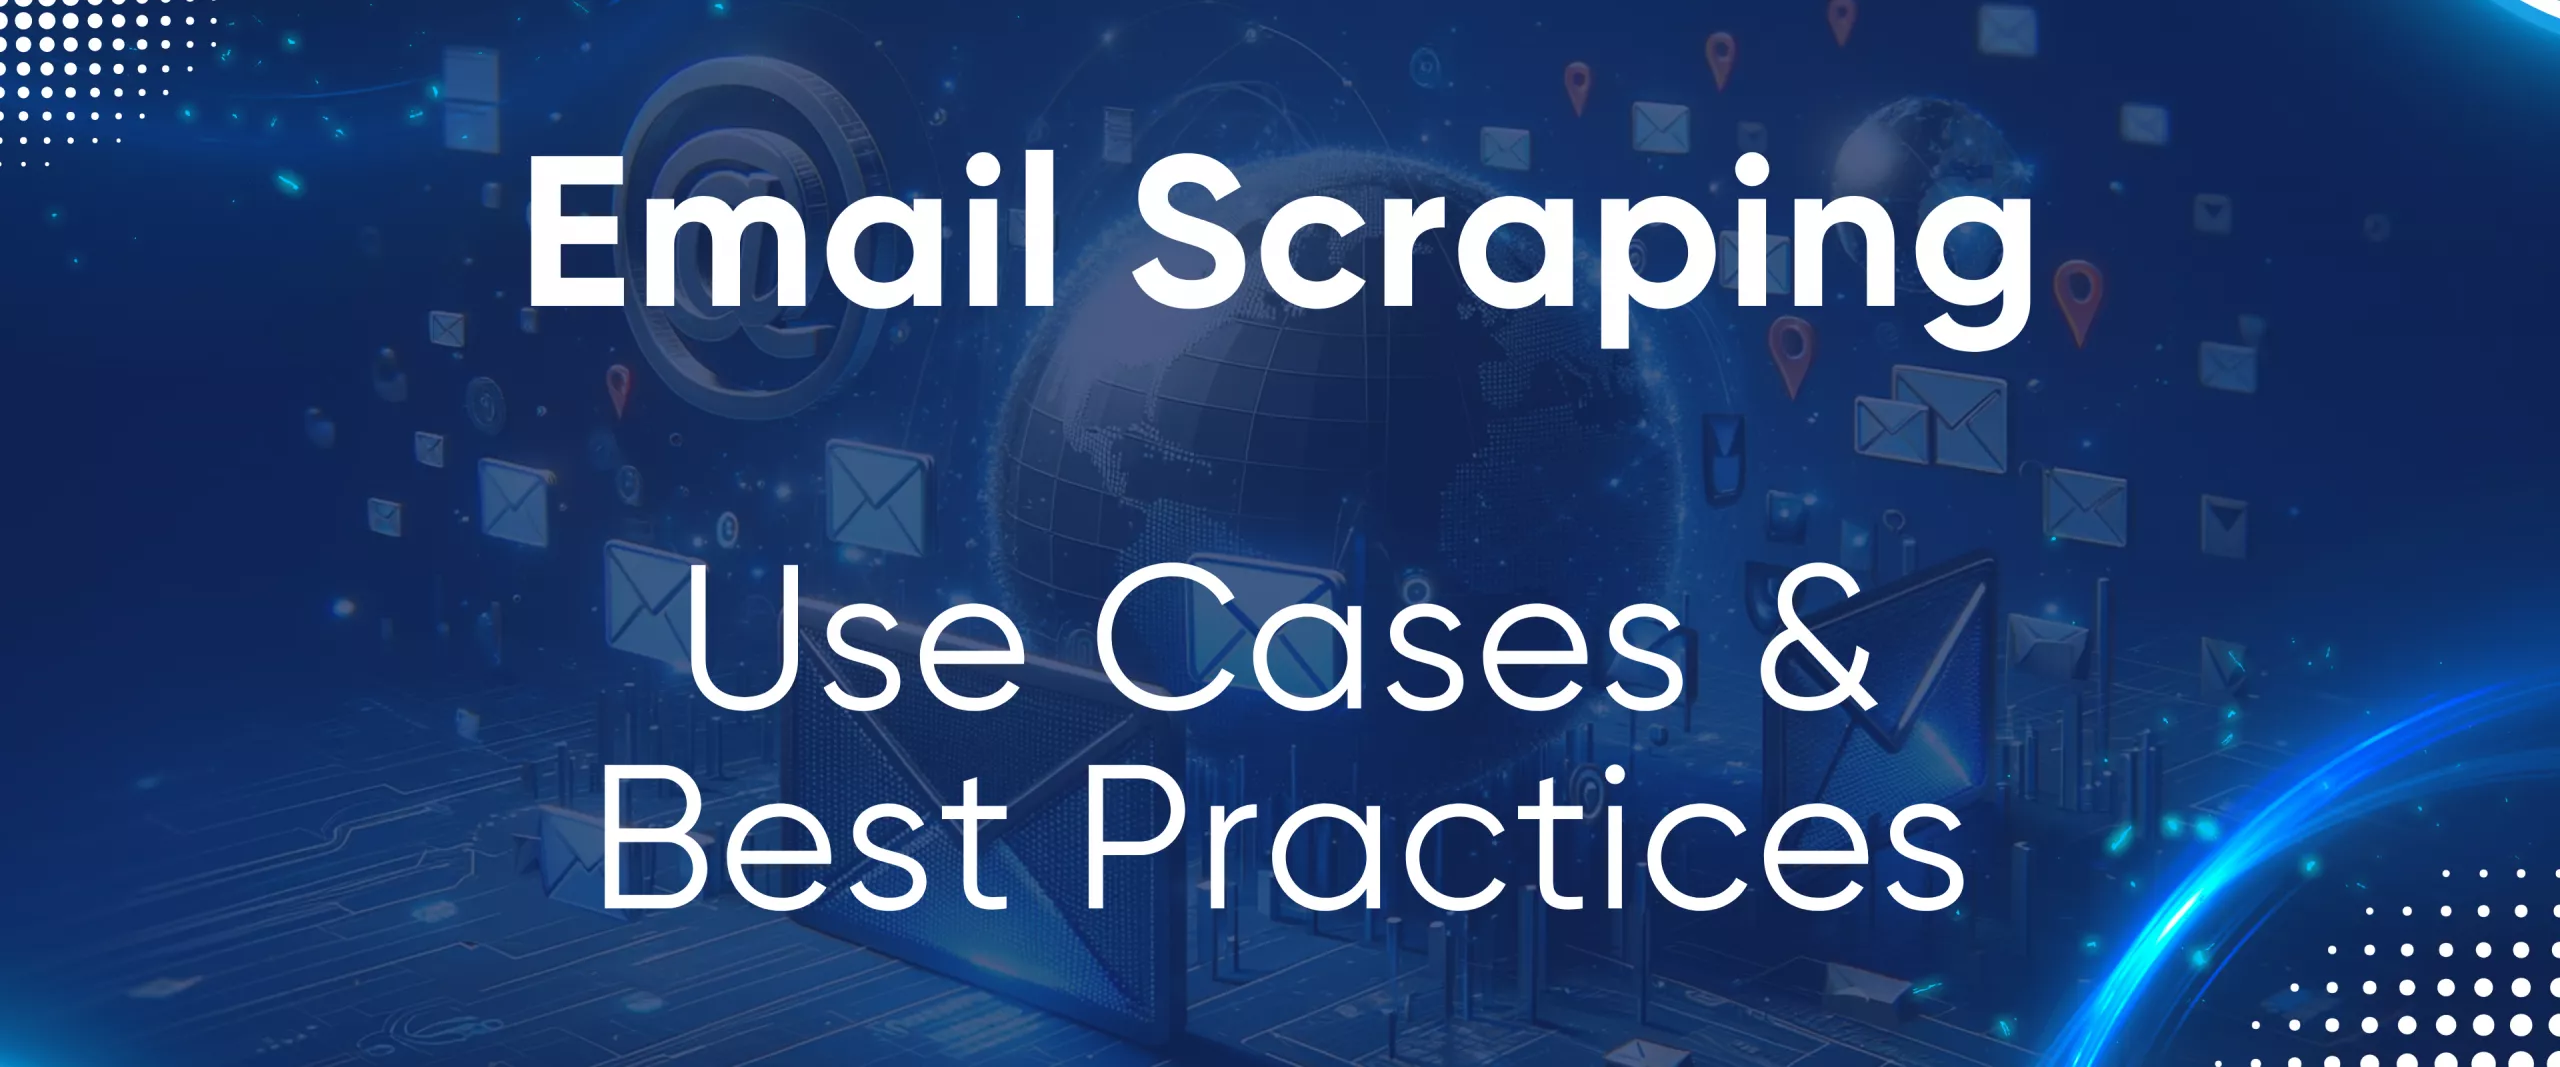 Email Scraping: Use Cases & Best Practices